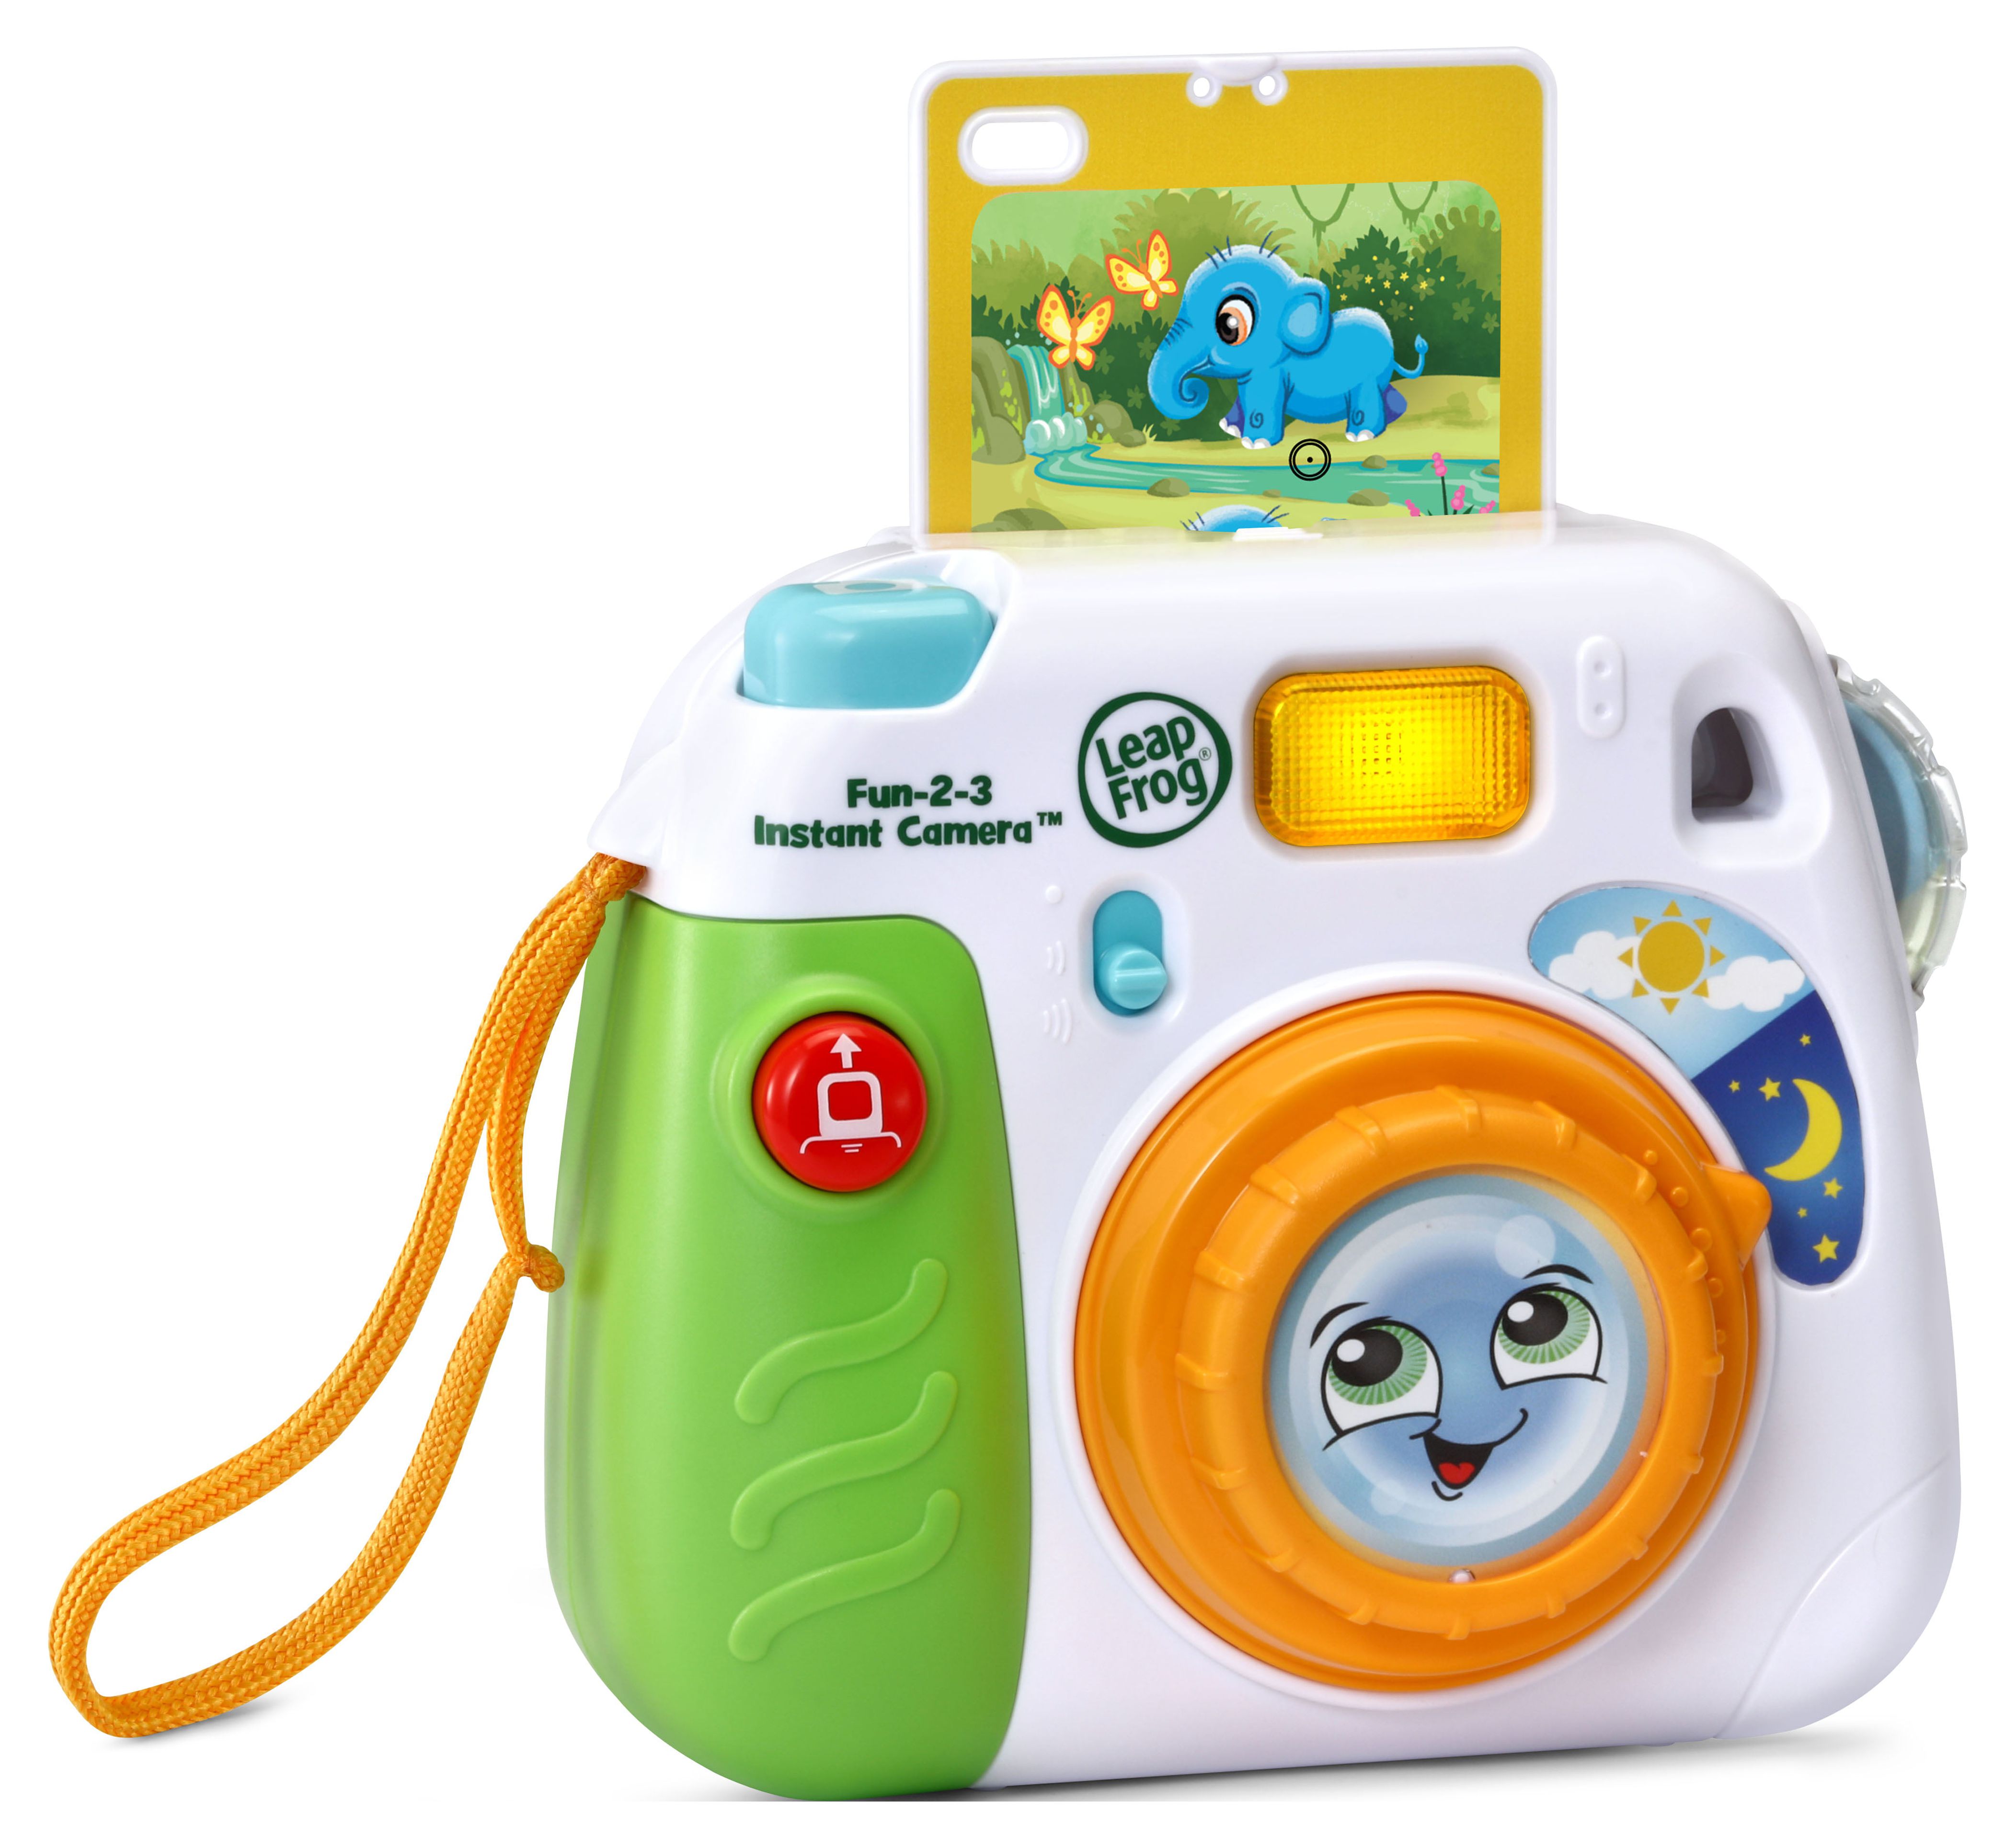 LeapFrog® Fun-2-3 Instant Camera™ Educational Pretend Photo Camera Toy - image 5 of 8